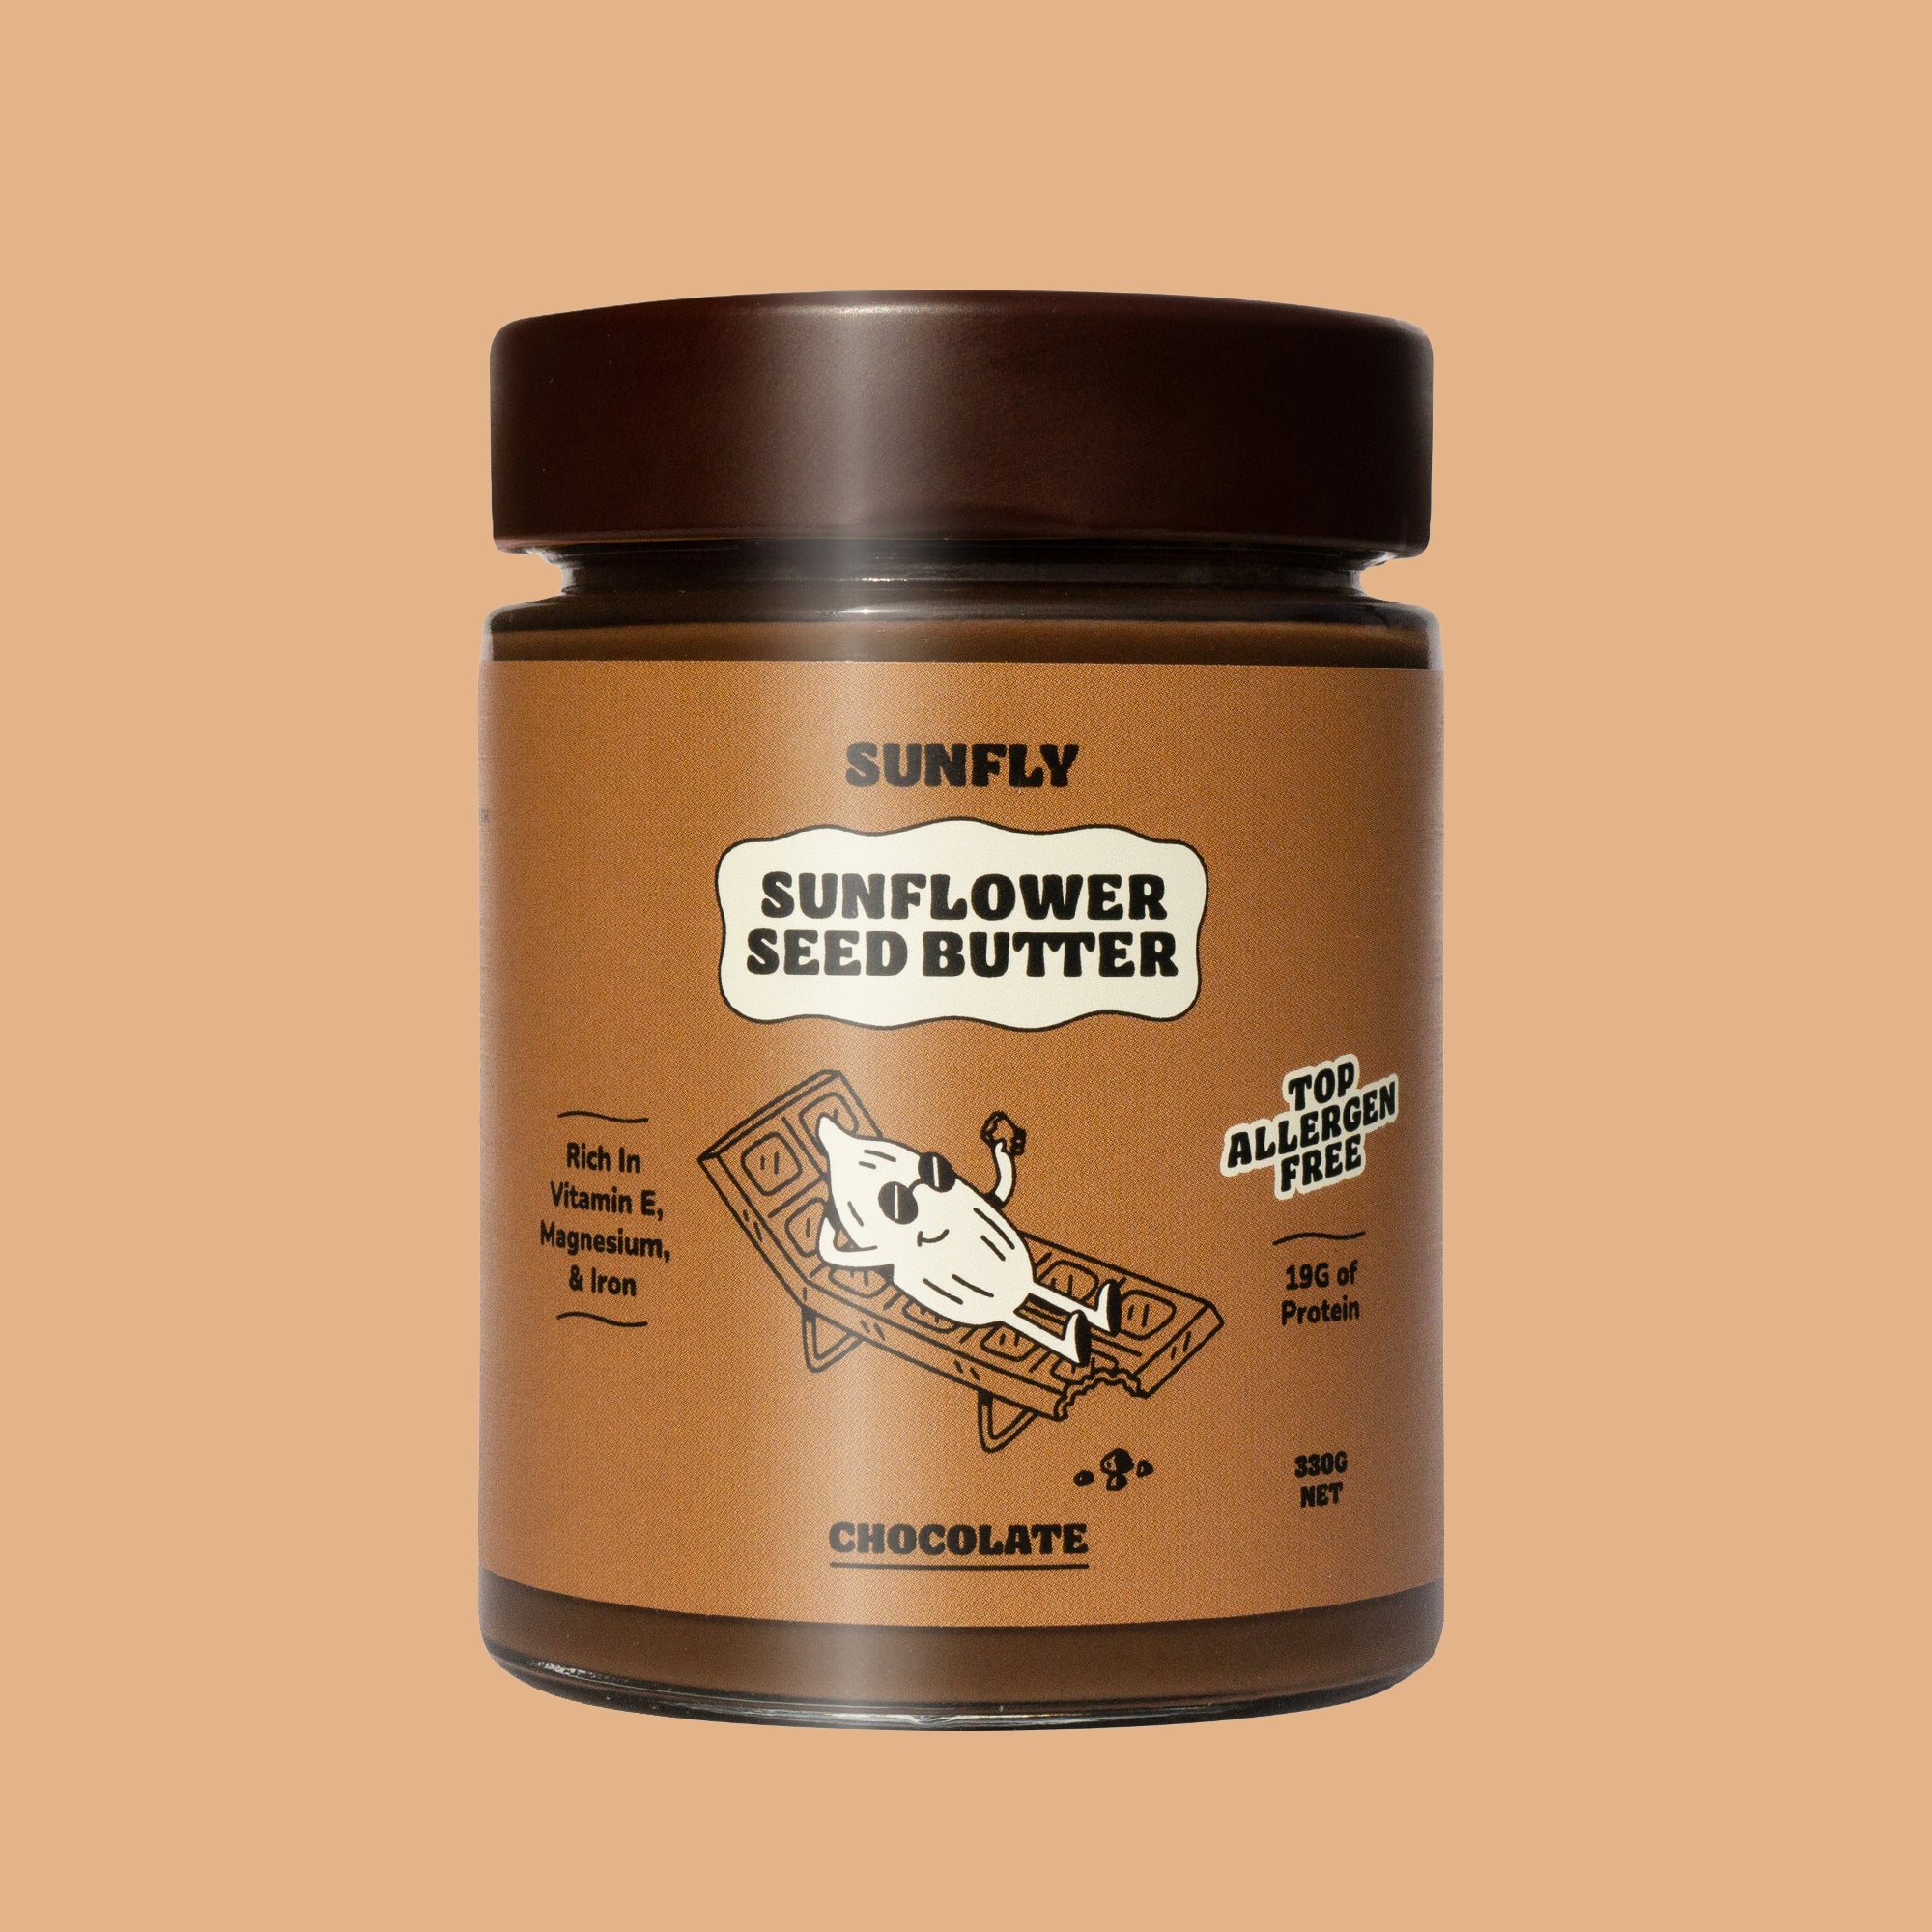 Sunflower Seed Butter: Chocolate